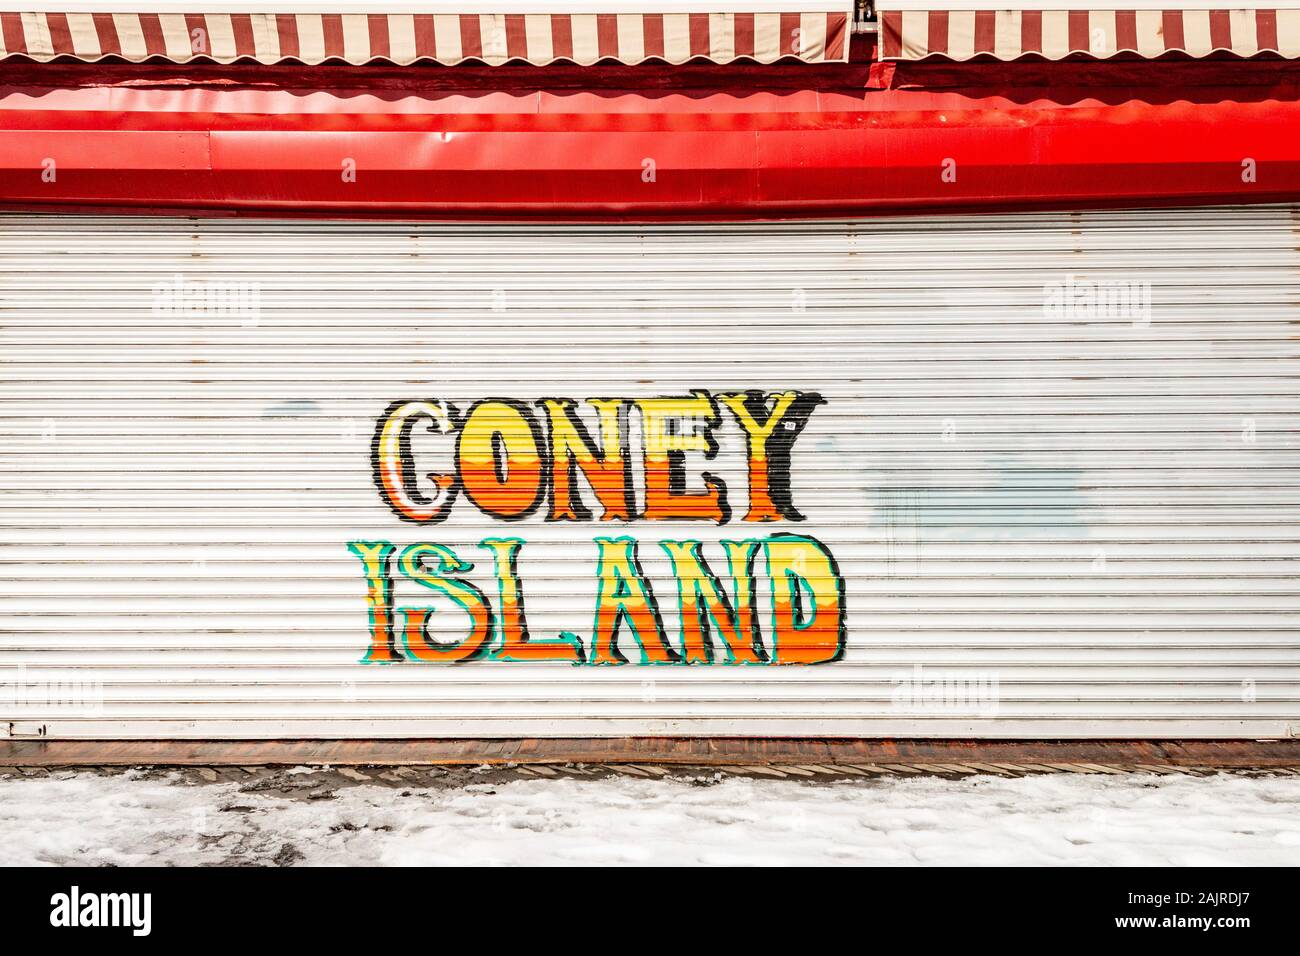 Coney Island graffiti spray painted on a metal roller shutter at Coney Island, Brooklyn, New York, United States Stock Photo